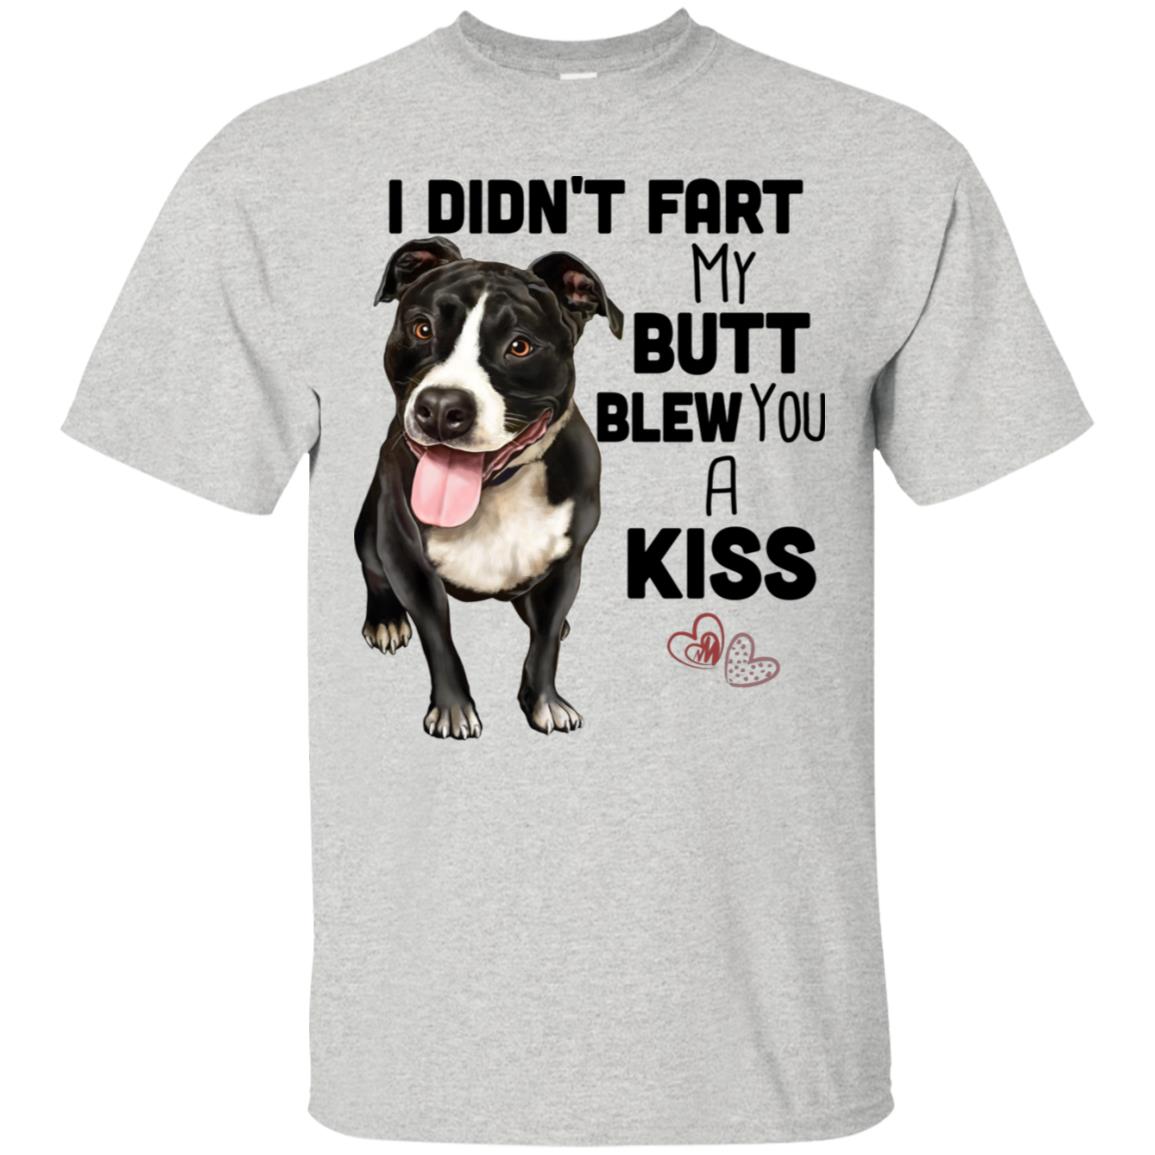 Pit Bull Gifts, Pit Bull shirt, funny T-Shirt, I Didn't Fart My Butt Blew You A Kiss - GoneBold.gift